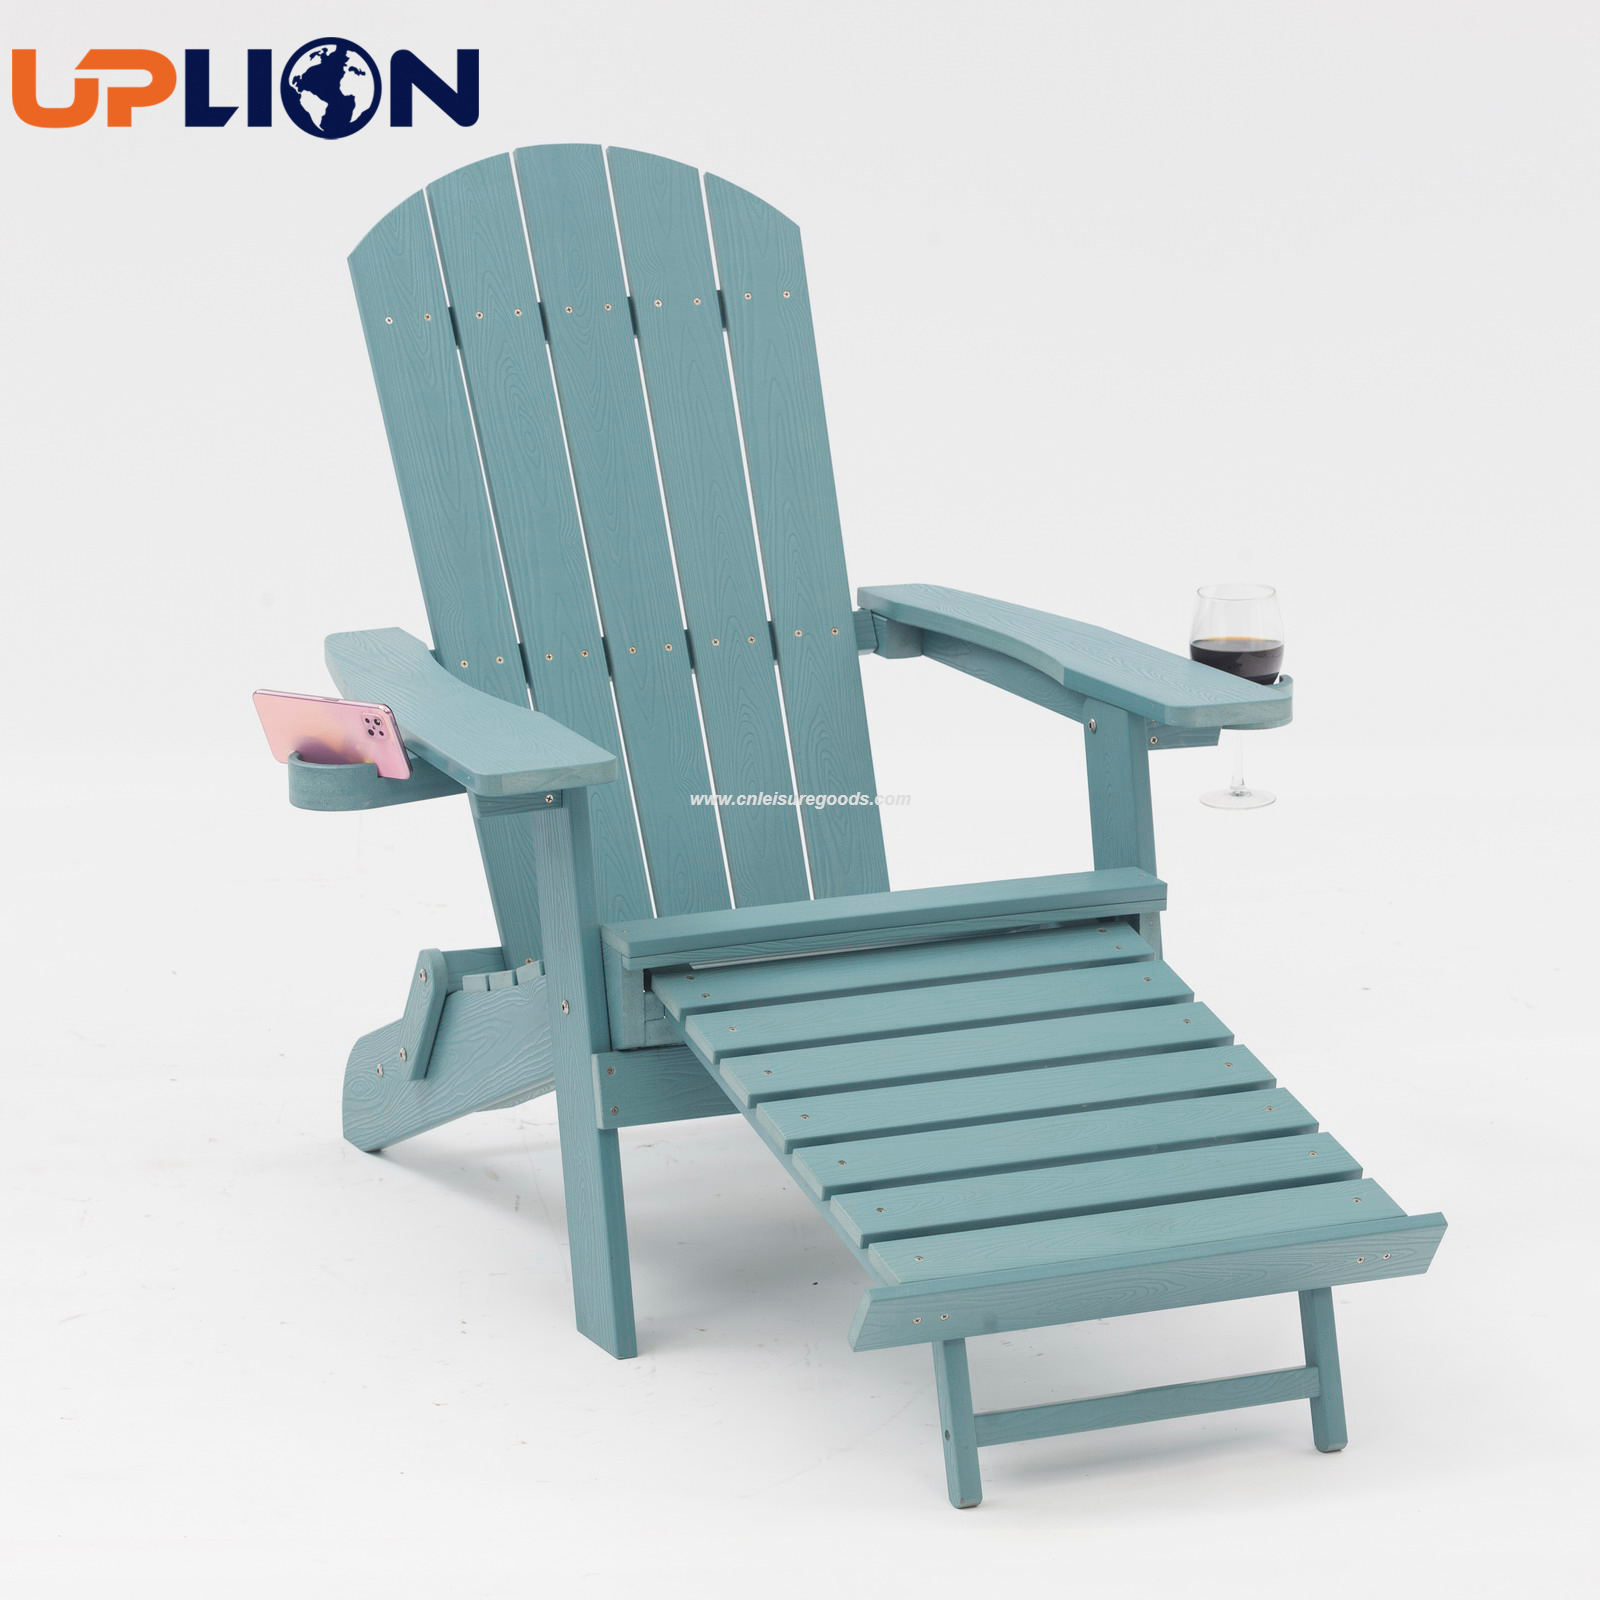 Uplion Wholesale Plastic Wood Adirondack Chair with and Cup Holder for Garden Backyard